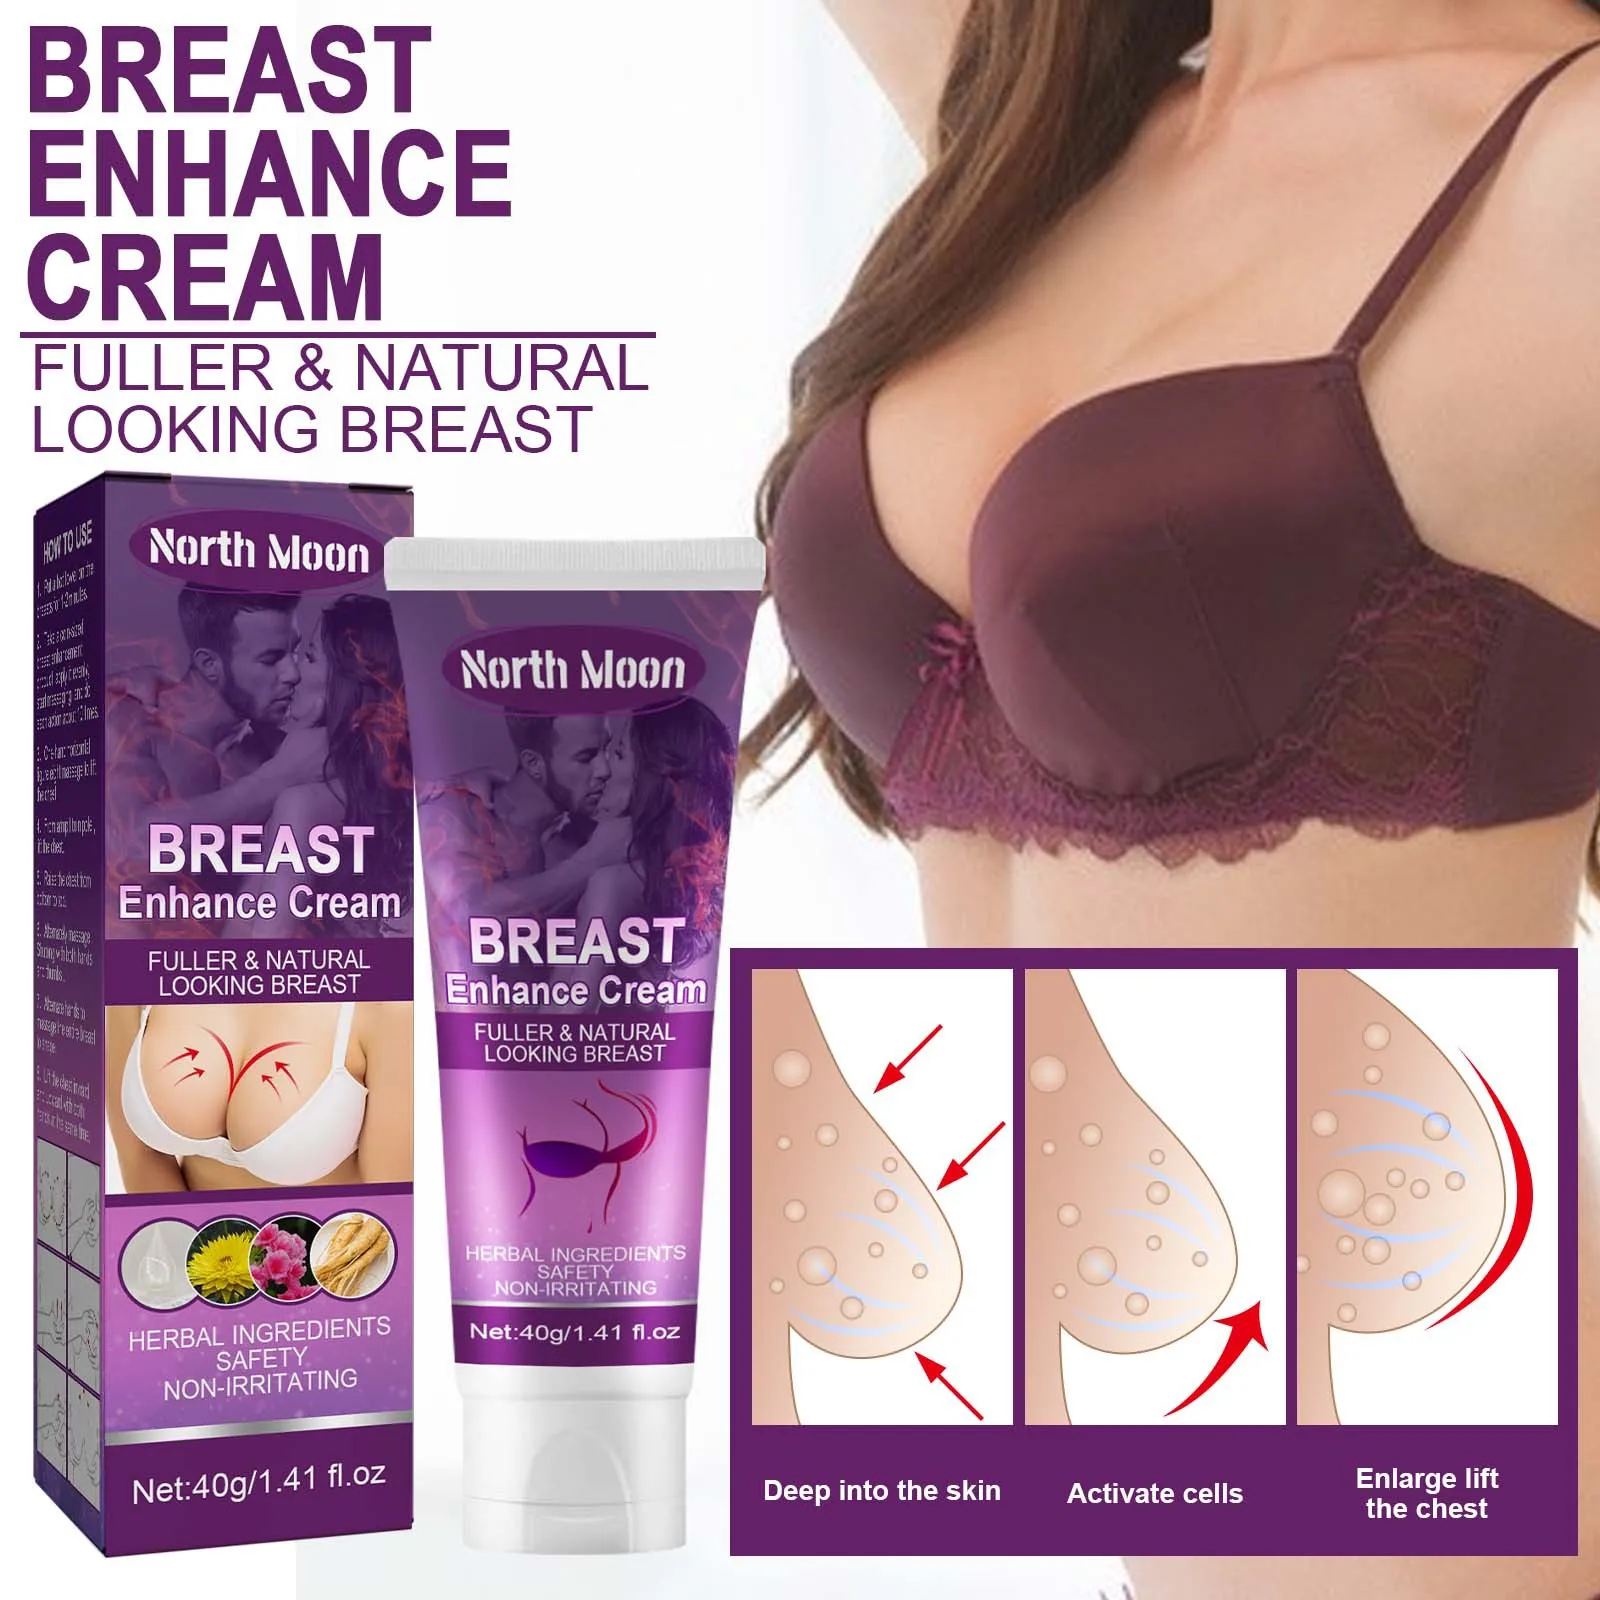 

40g Breast Enhancement Massage Cream Full Lifting Firming Big Bust Enhance Elasticity Chest Care Effective Up Size